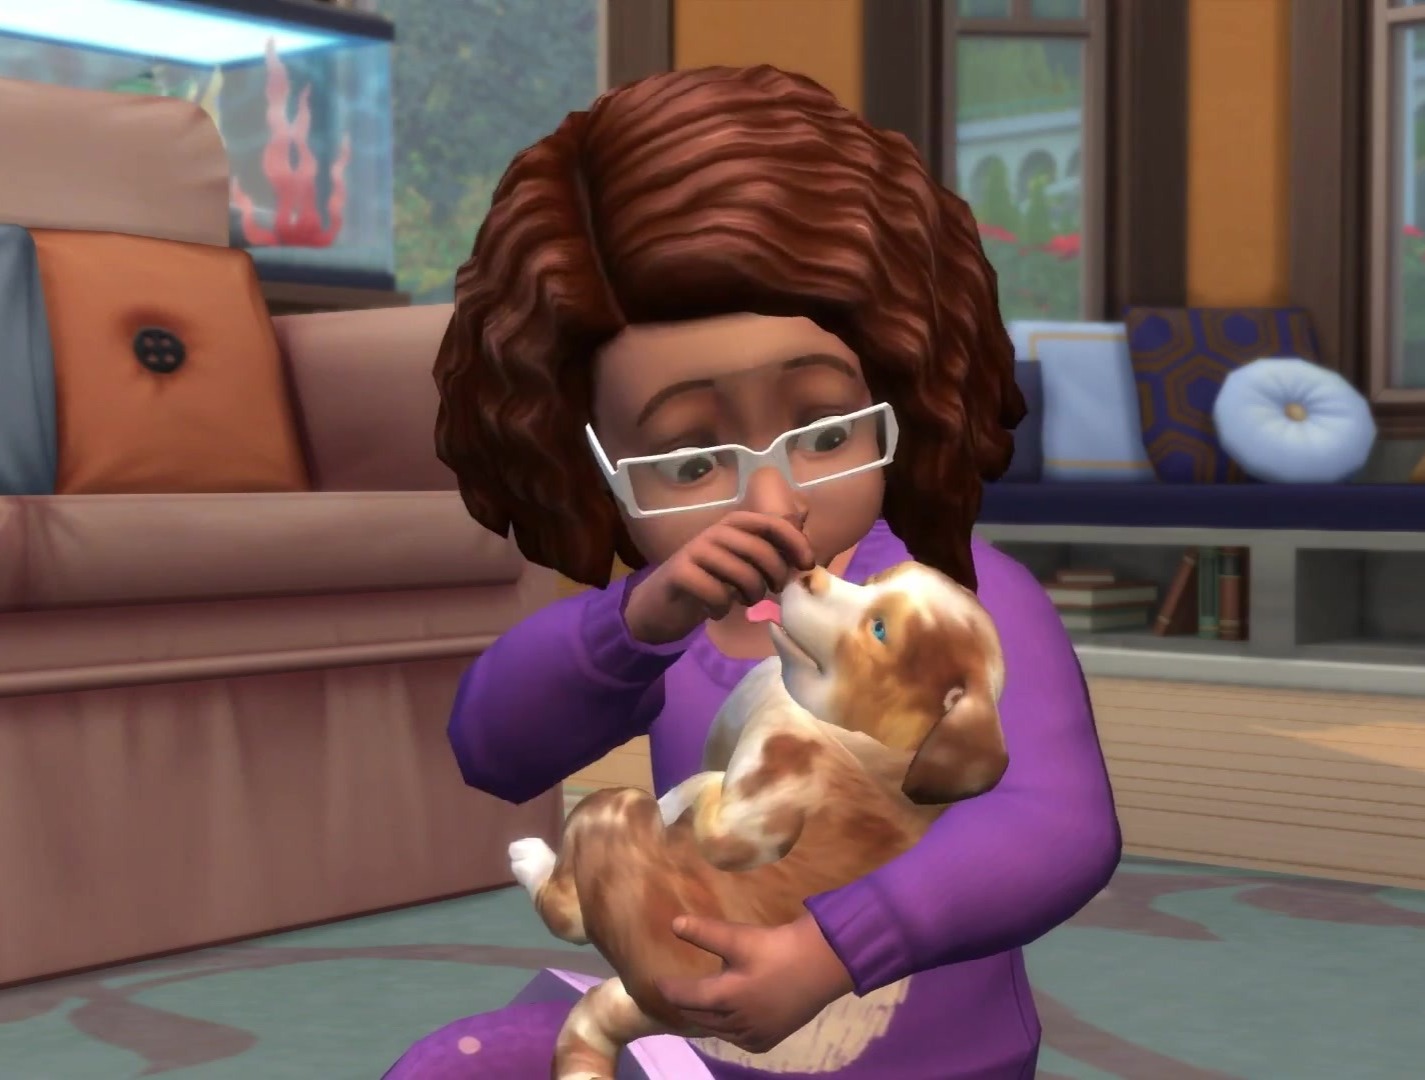 sims 4 cats and dogs amazon code